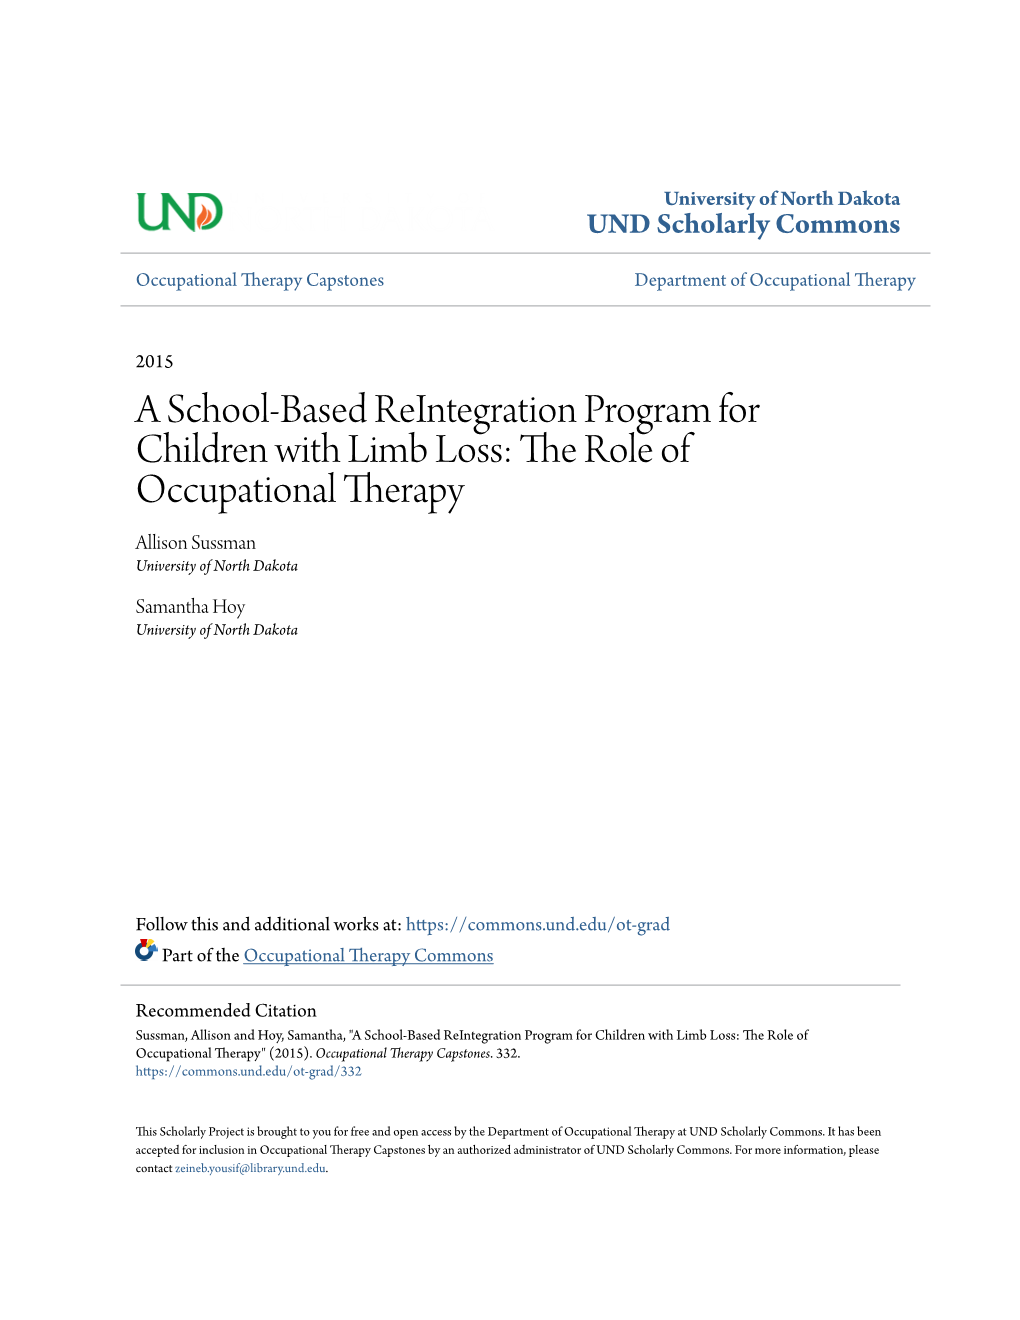 A School-Based Reintegration Program for Children with Limb Loss: the Role of Occupational Therapy Allison Sussman University of North Dakota